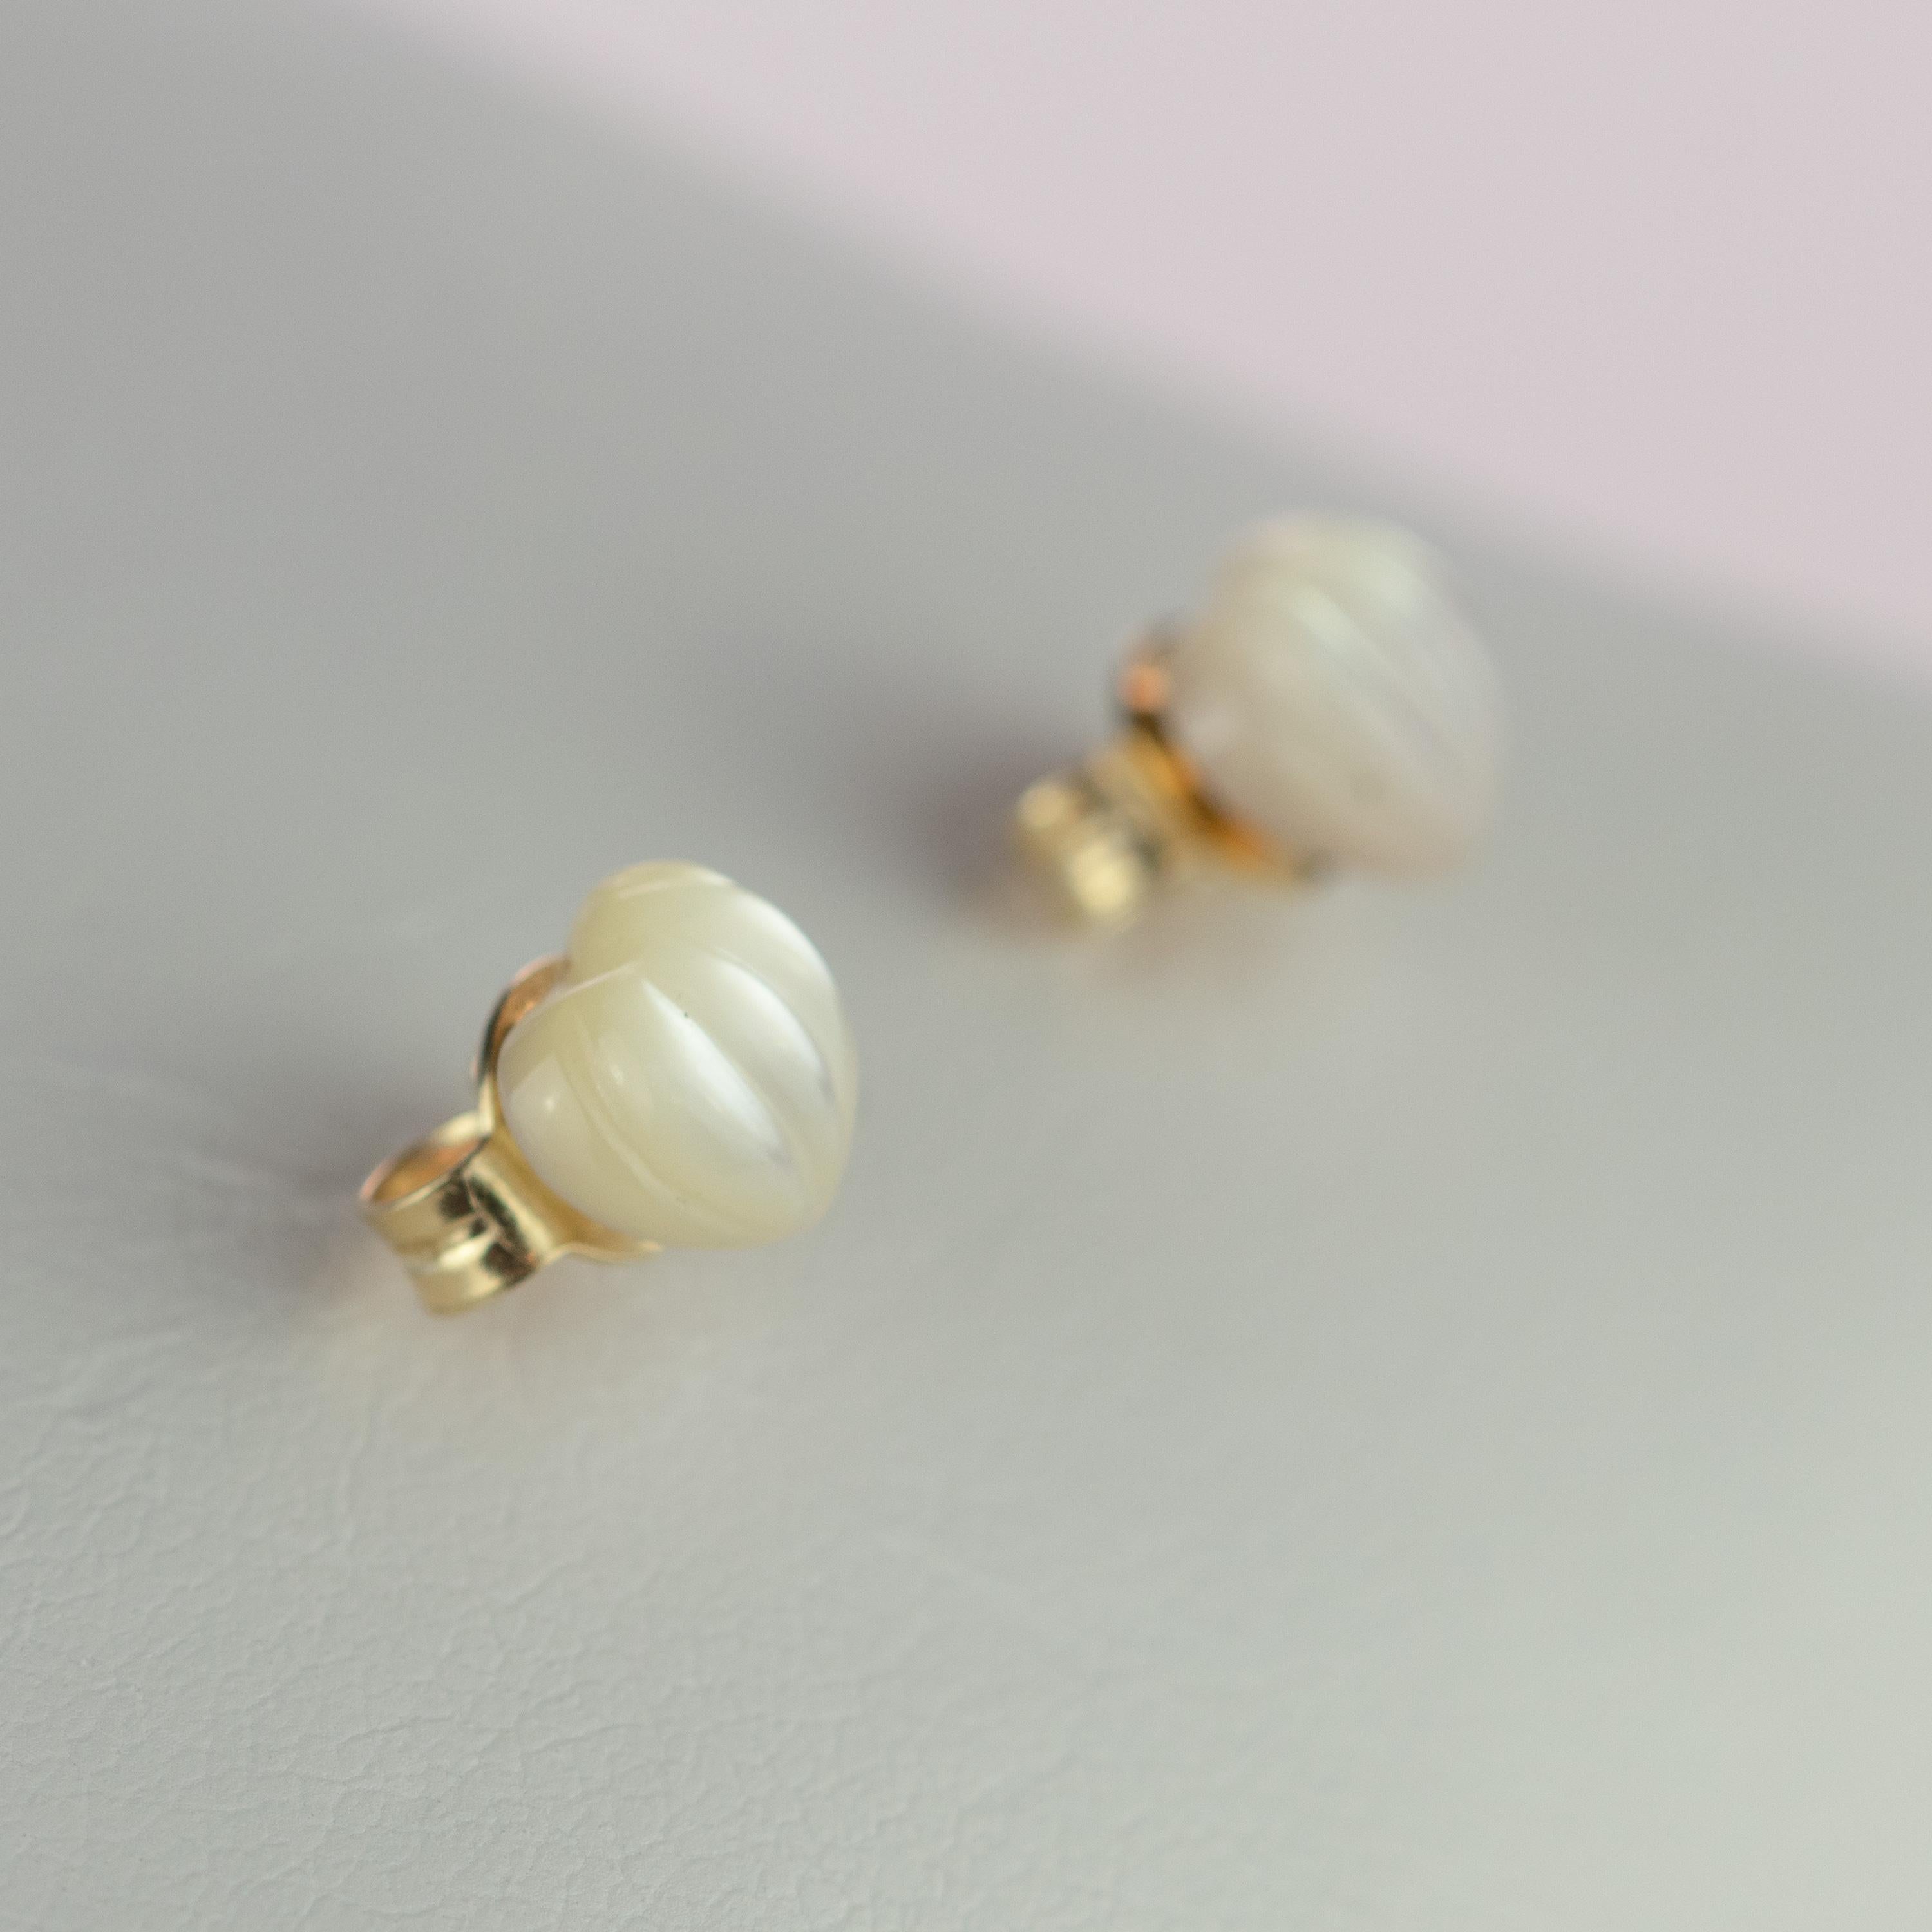 Astonishing and lovely white mother of pearl heart stud earrings. Natural carved lines that evoke the italian handmade traditional jewelry work.
 
This delicate design shows the sweetness and innocence of the jewelry. It takes us to those first